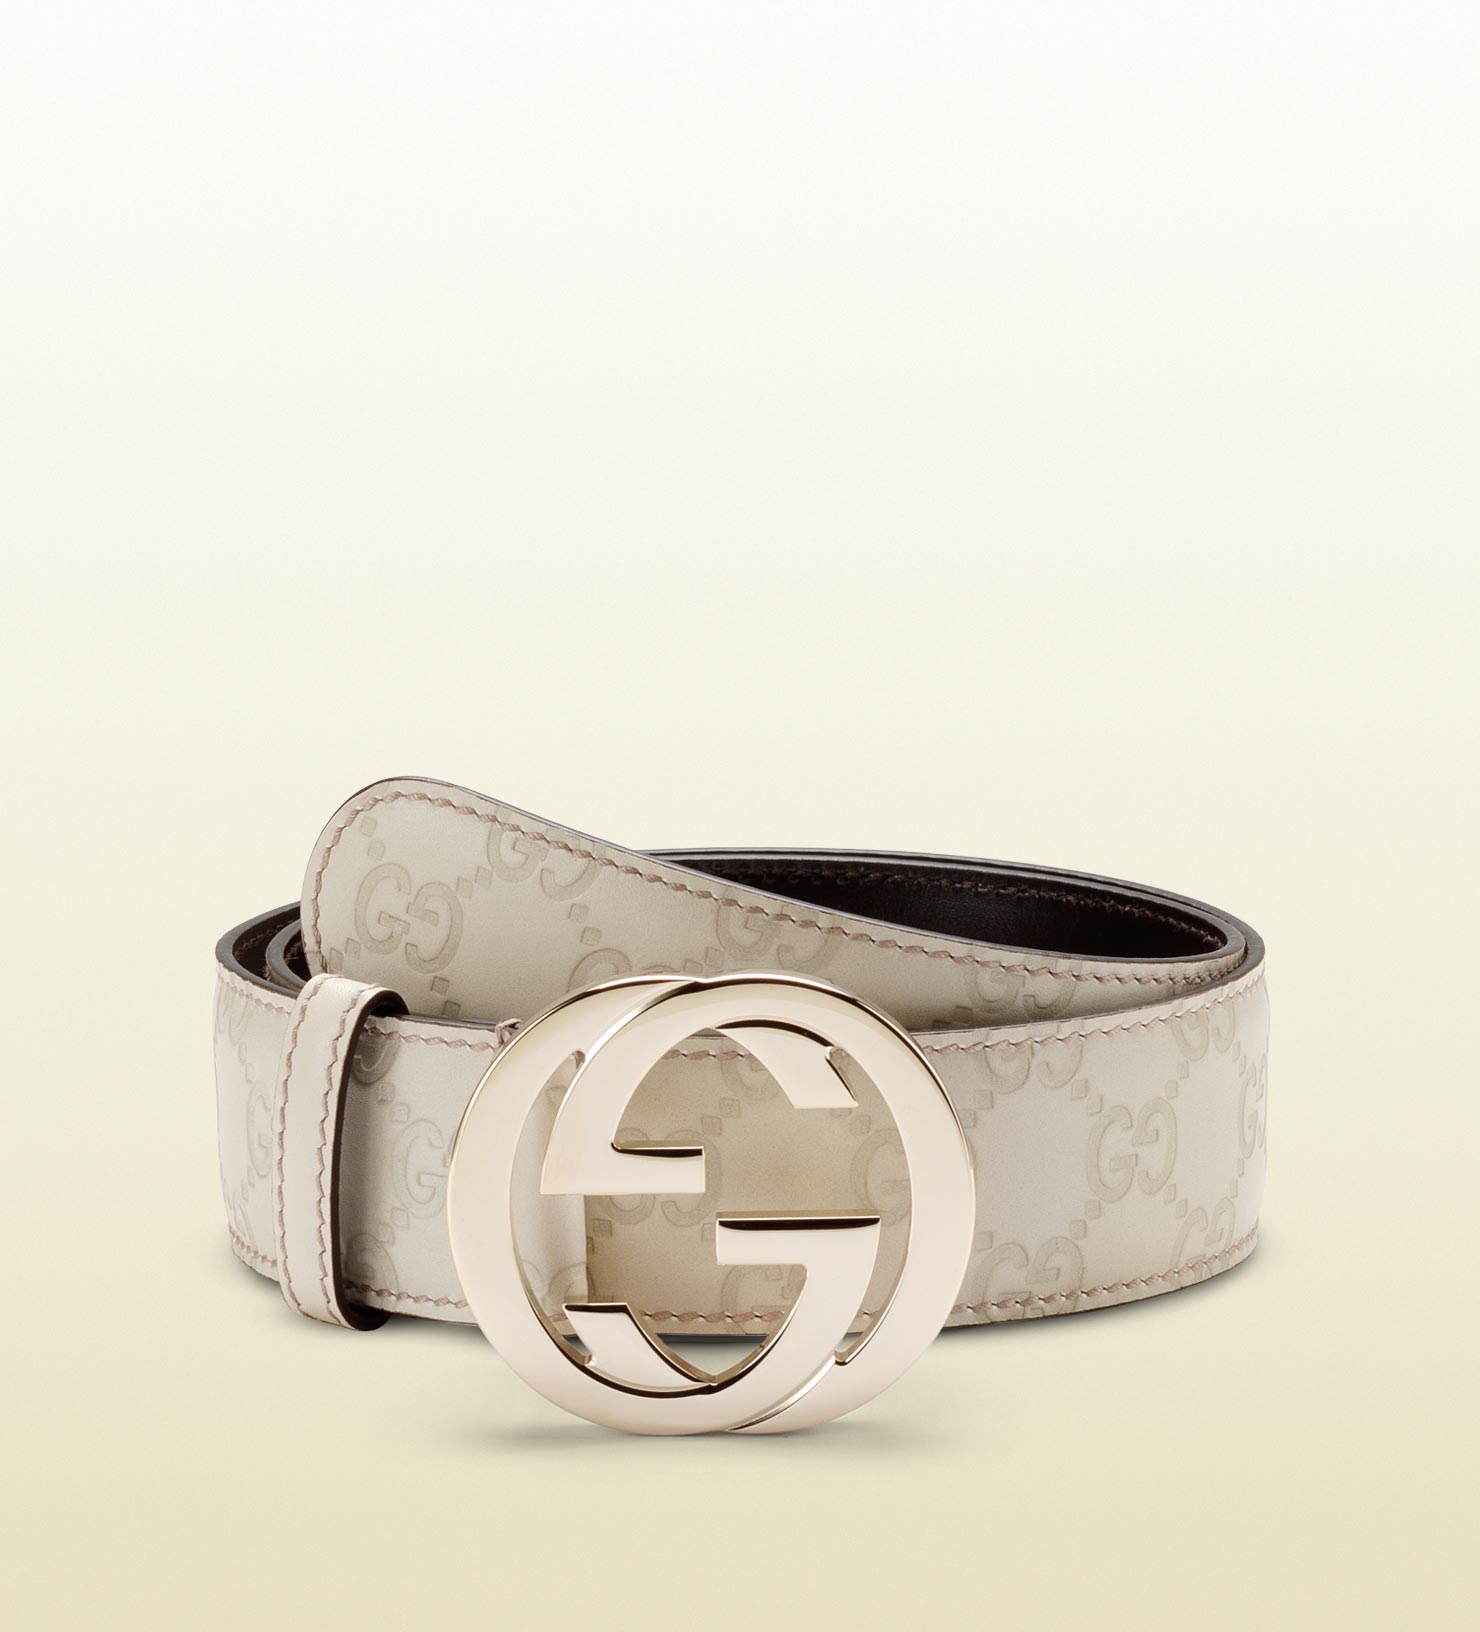 Gucci Ssima Leather Belt With Interlocking G Buckle in Natural for Men - Lyst